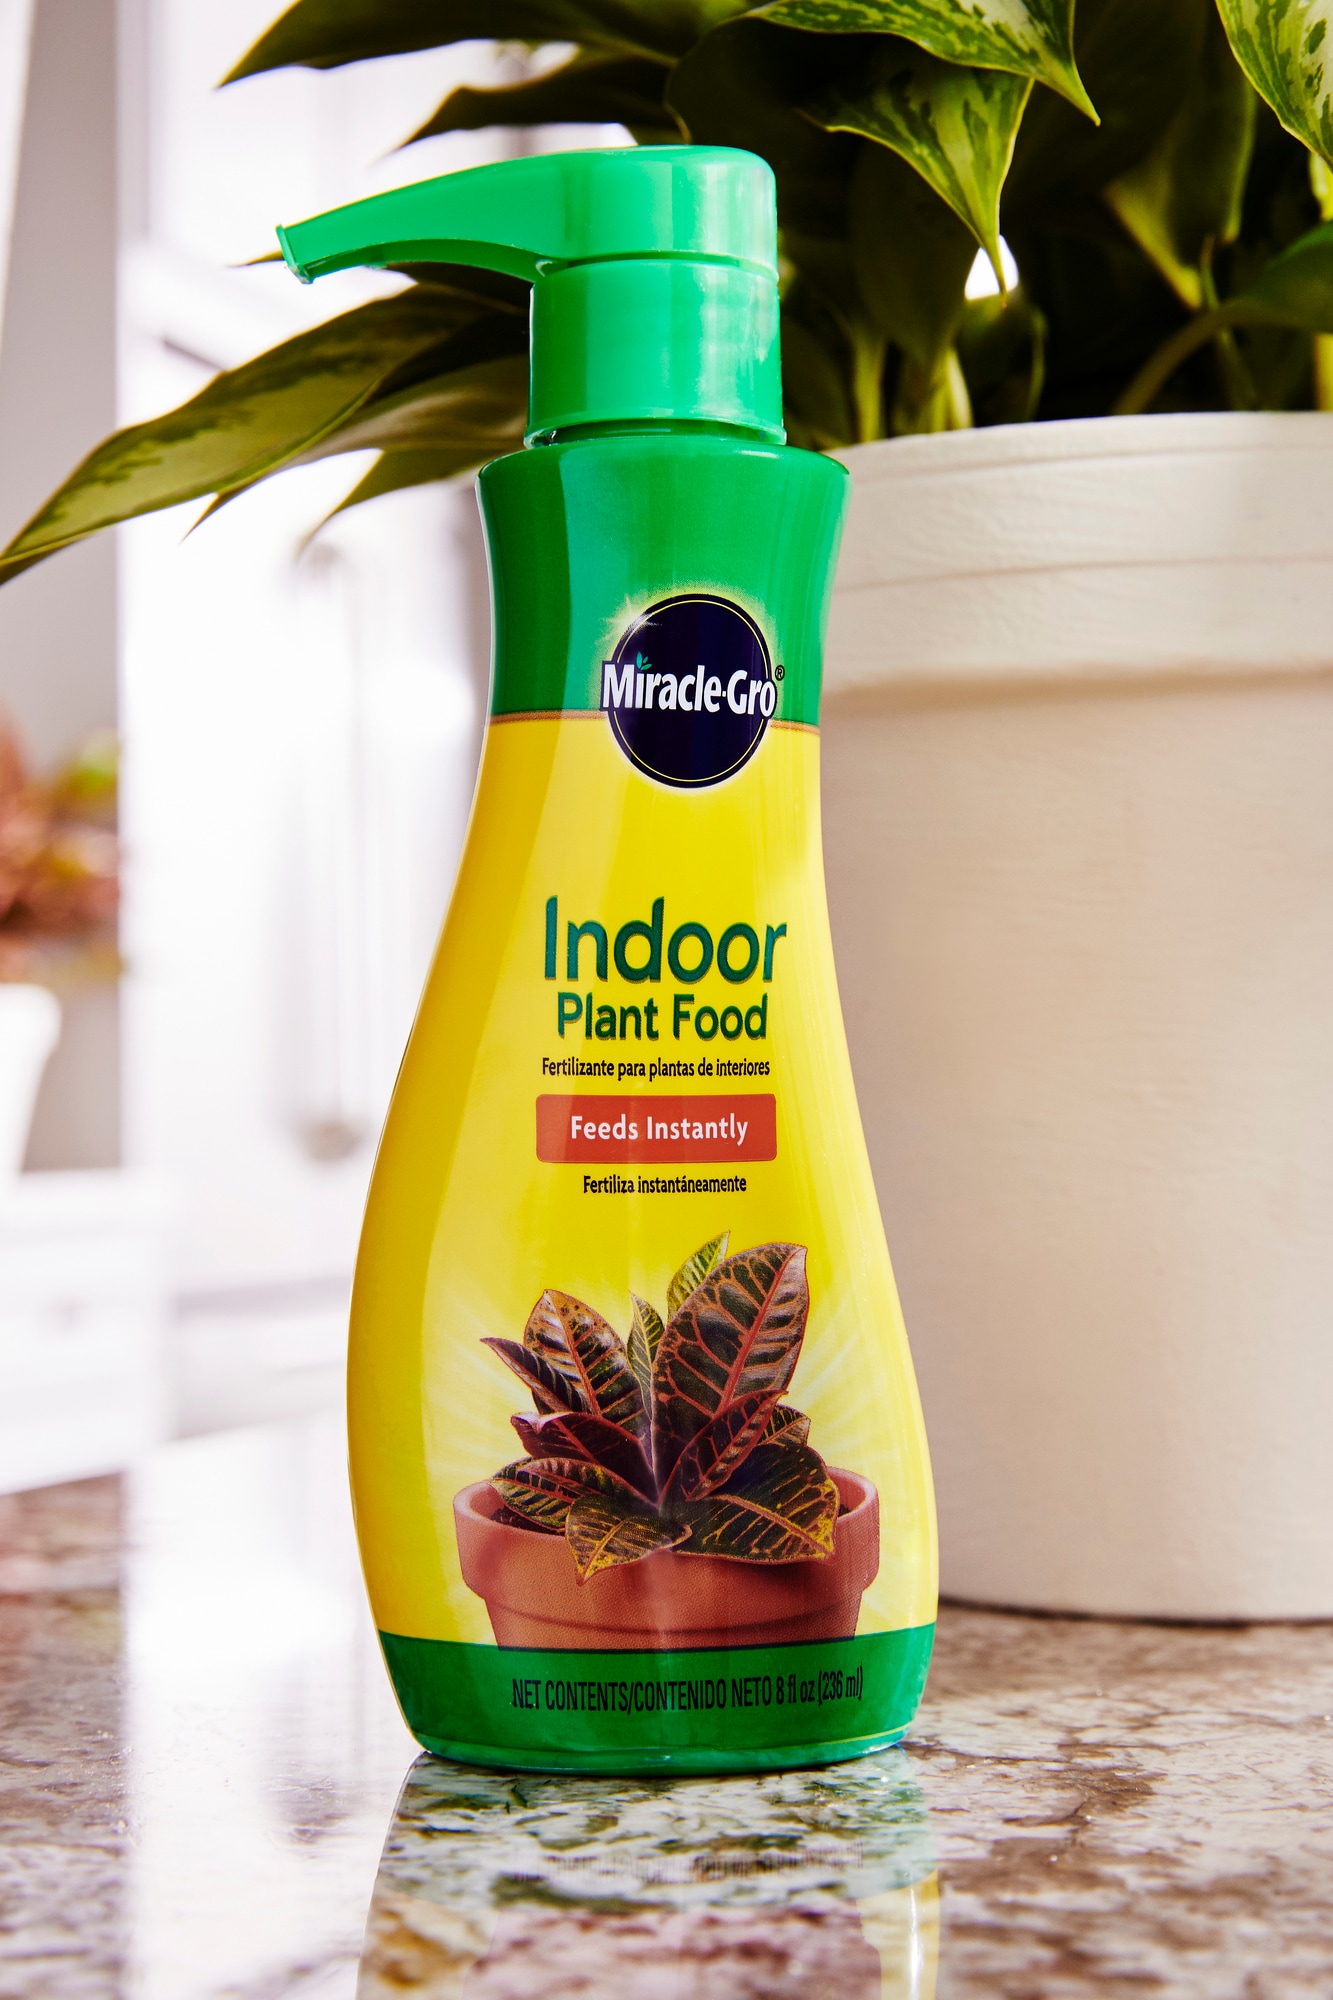 Miracle gro for indoor plants at lowes